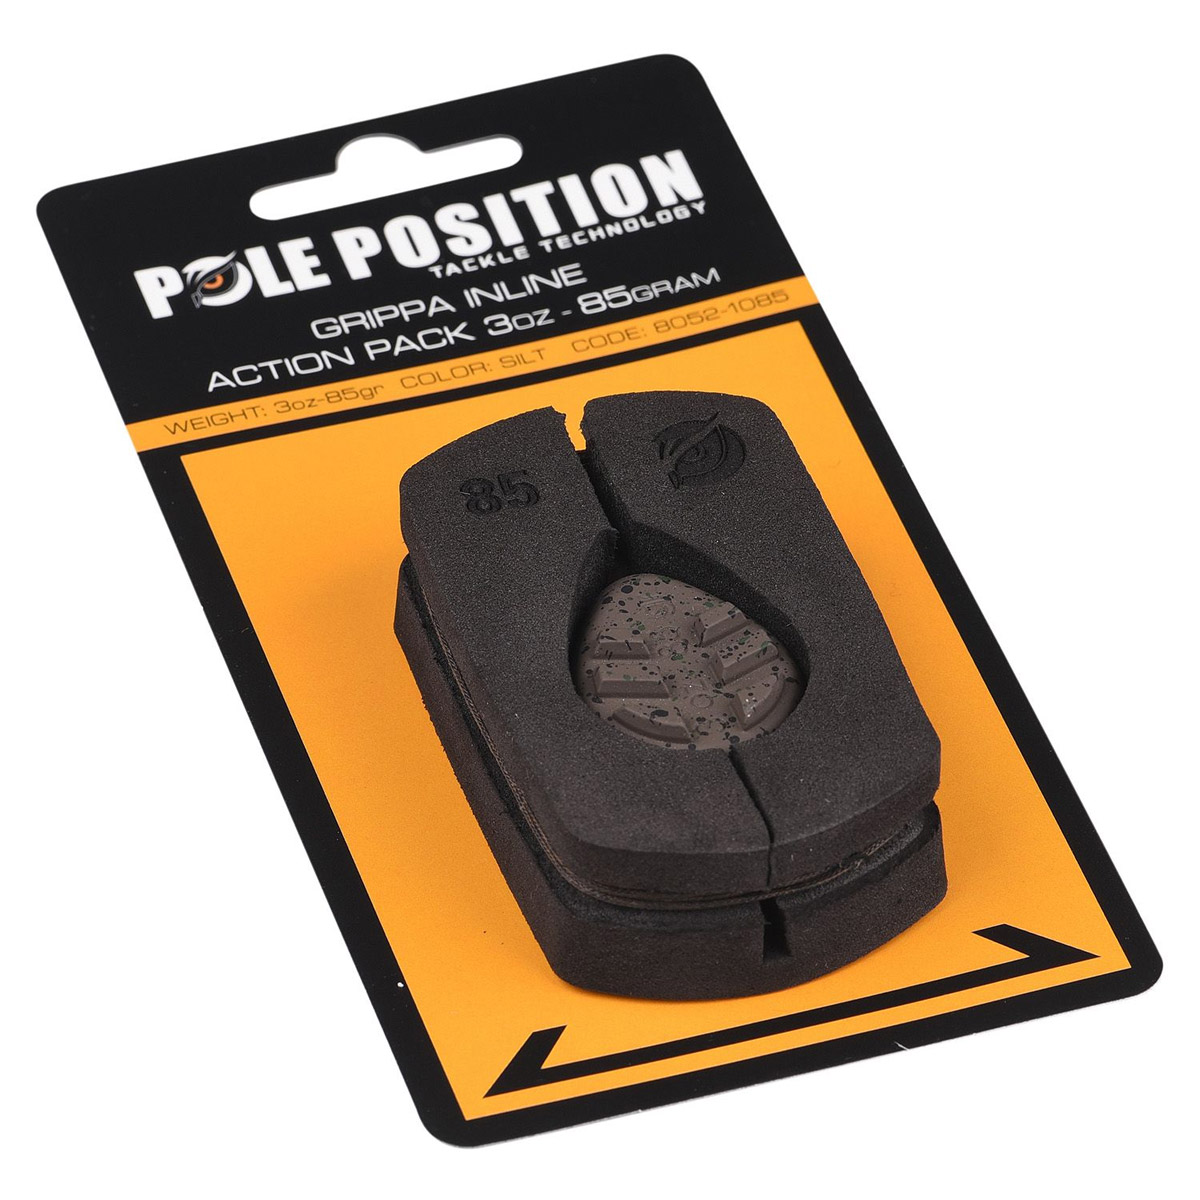 Pole Position Grippa Inline Action Pack